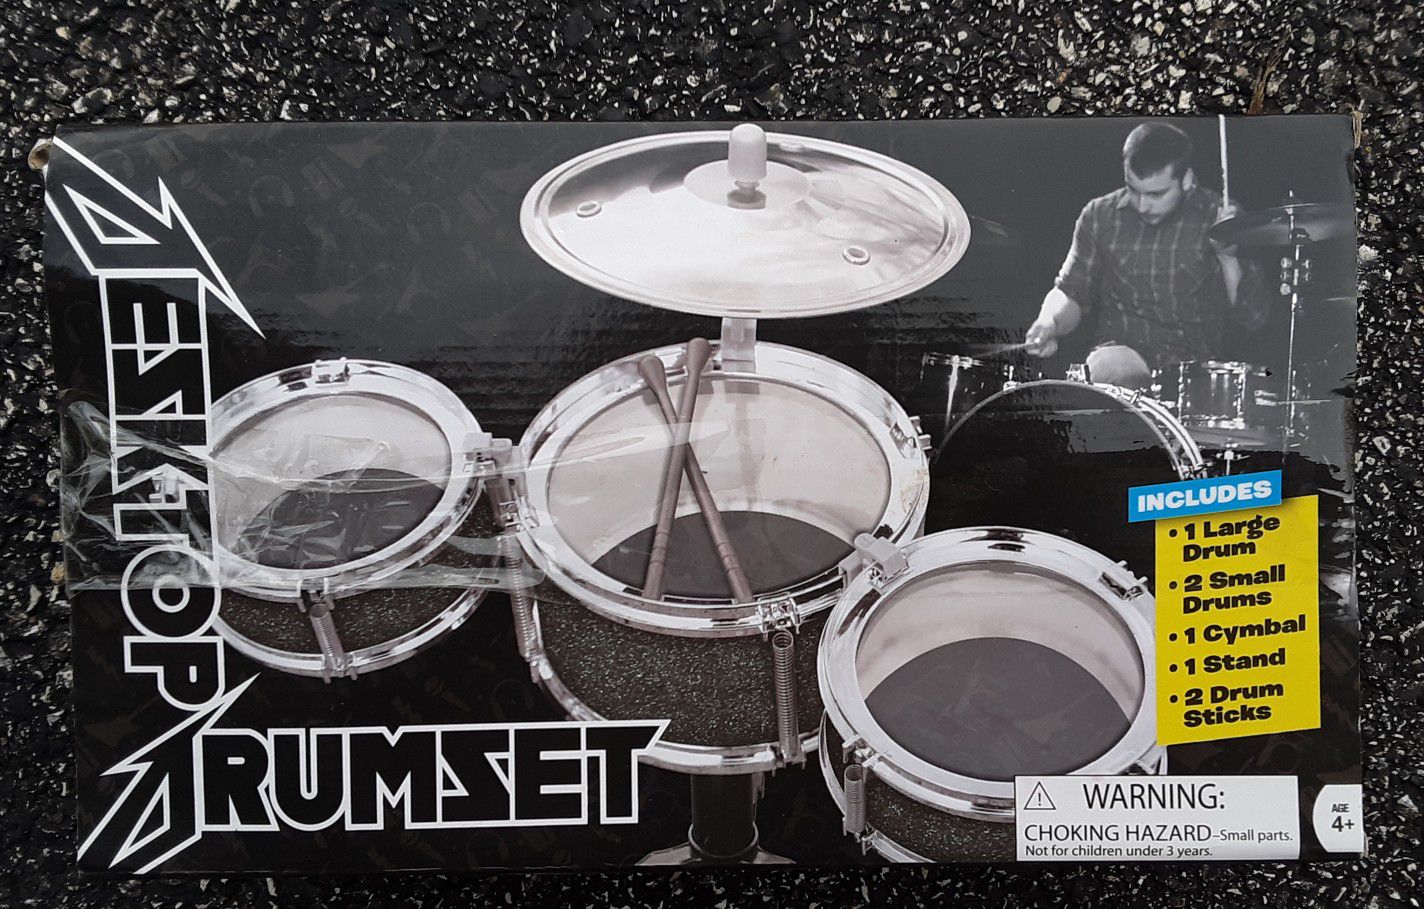 Desktop Drum Set with Cymbal in box